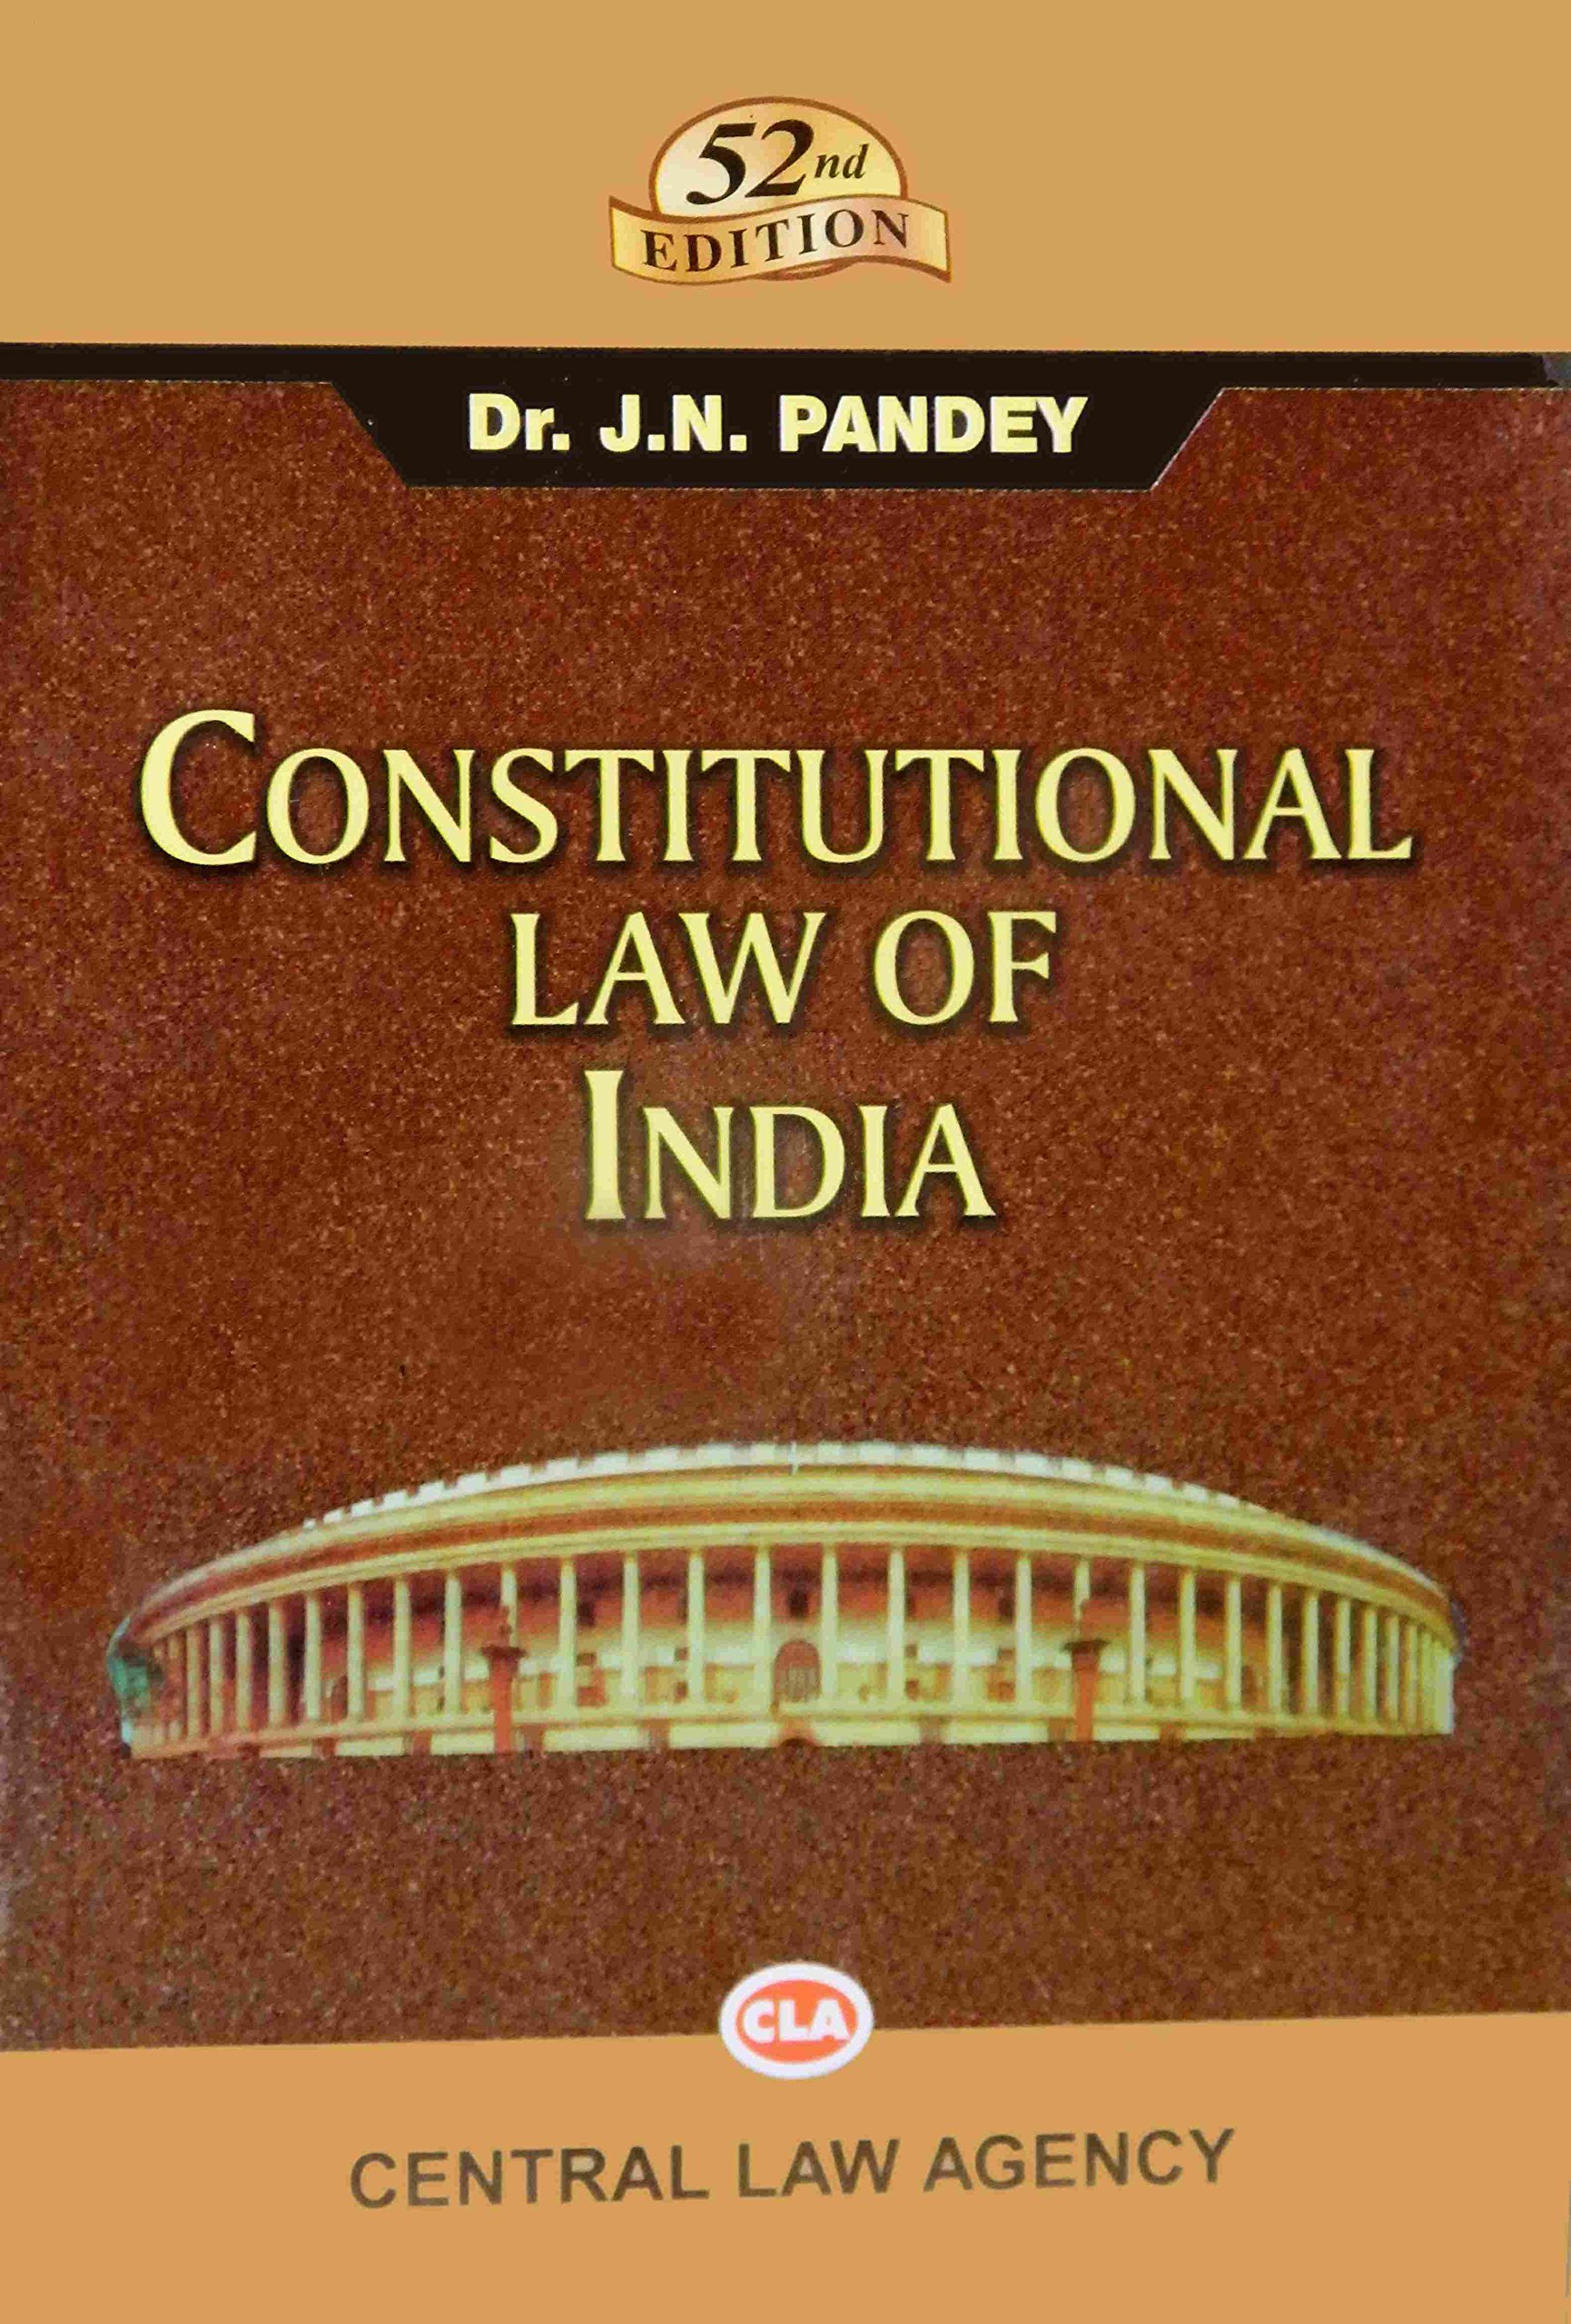 constitutional law of india by j n pandey pdf viewer